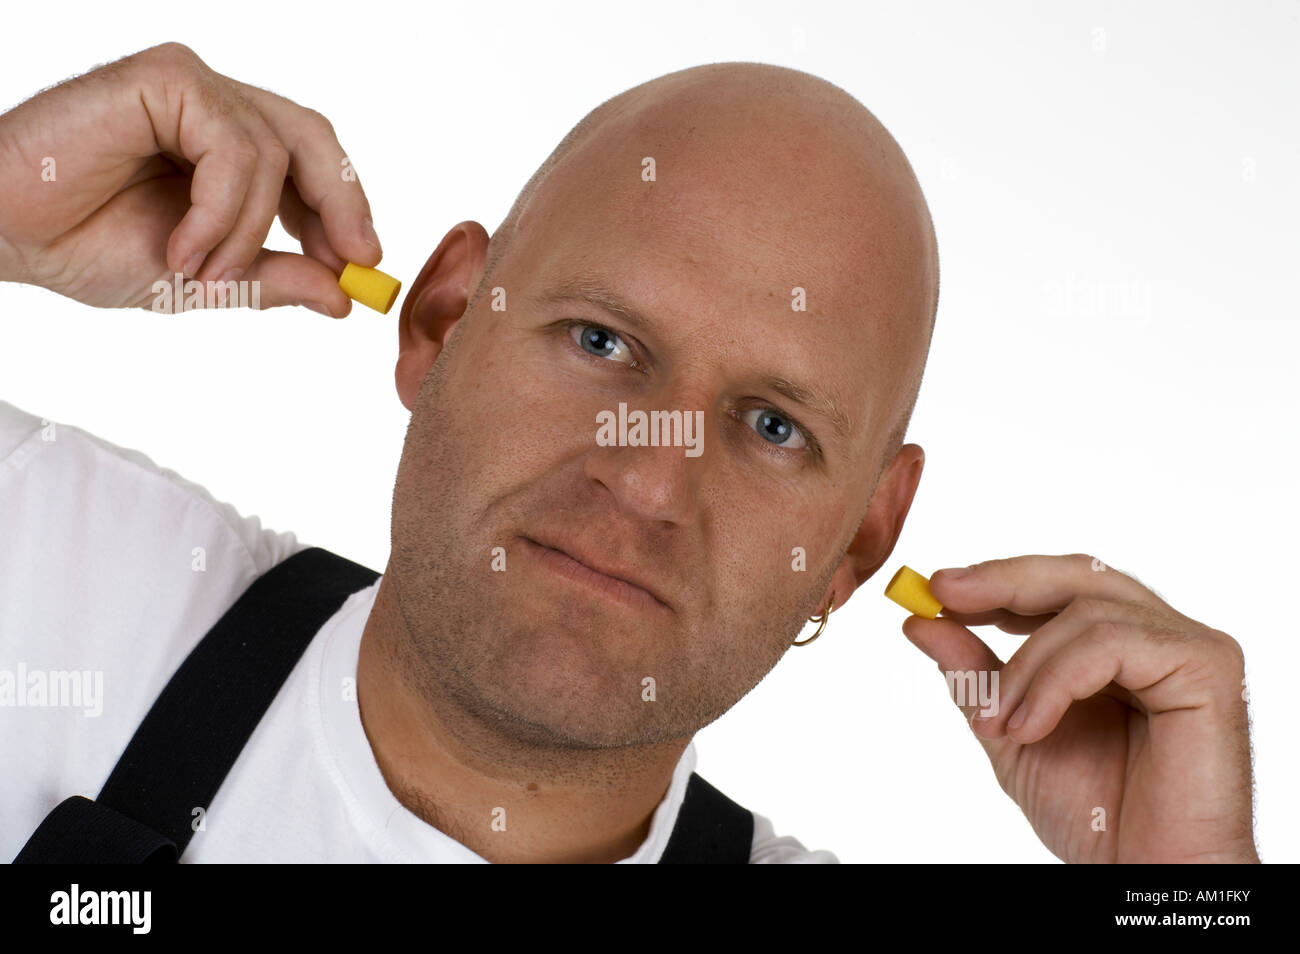 Man with ear protection Stock Photo